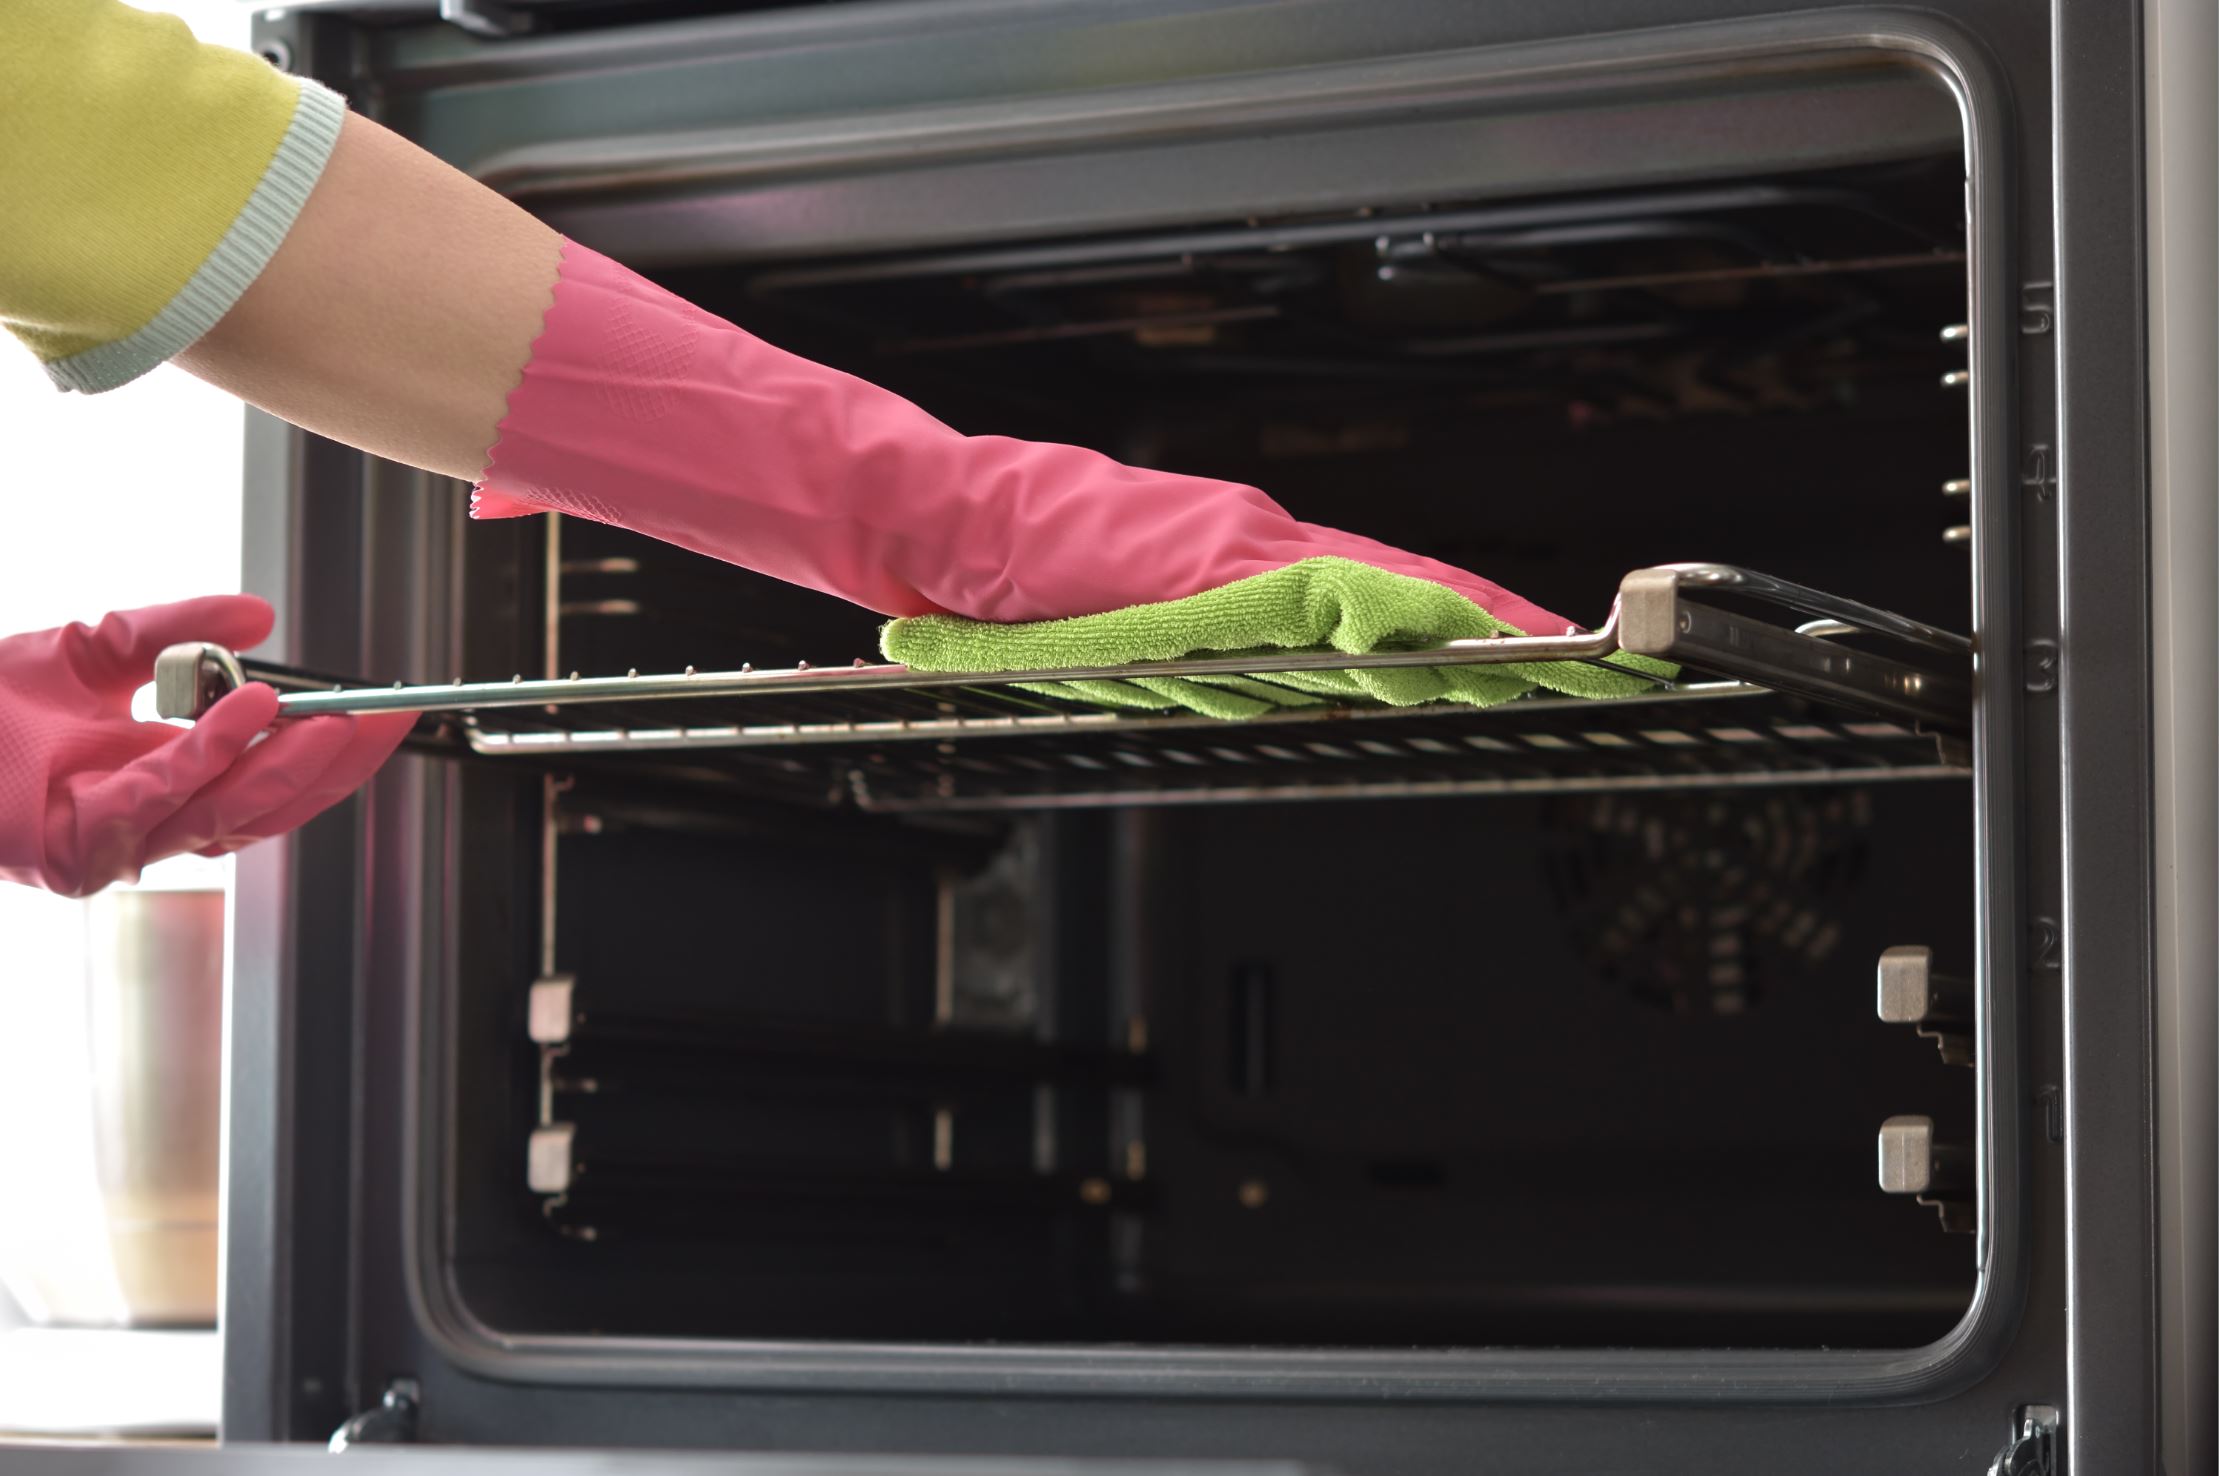 Professional Oven Cleaning Service Prices In 2022 | Checkatrade